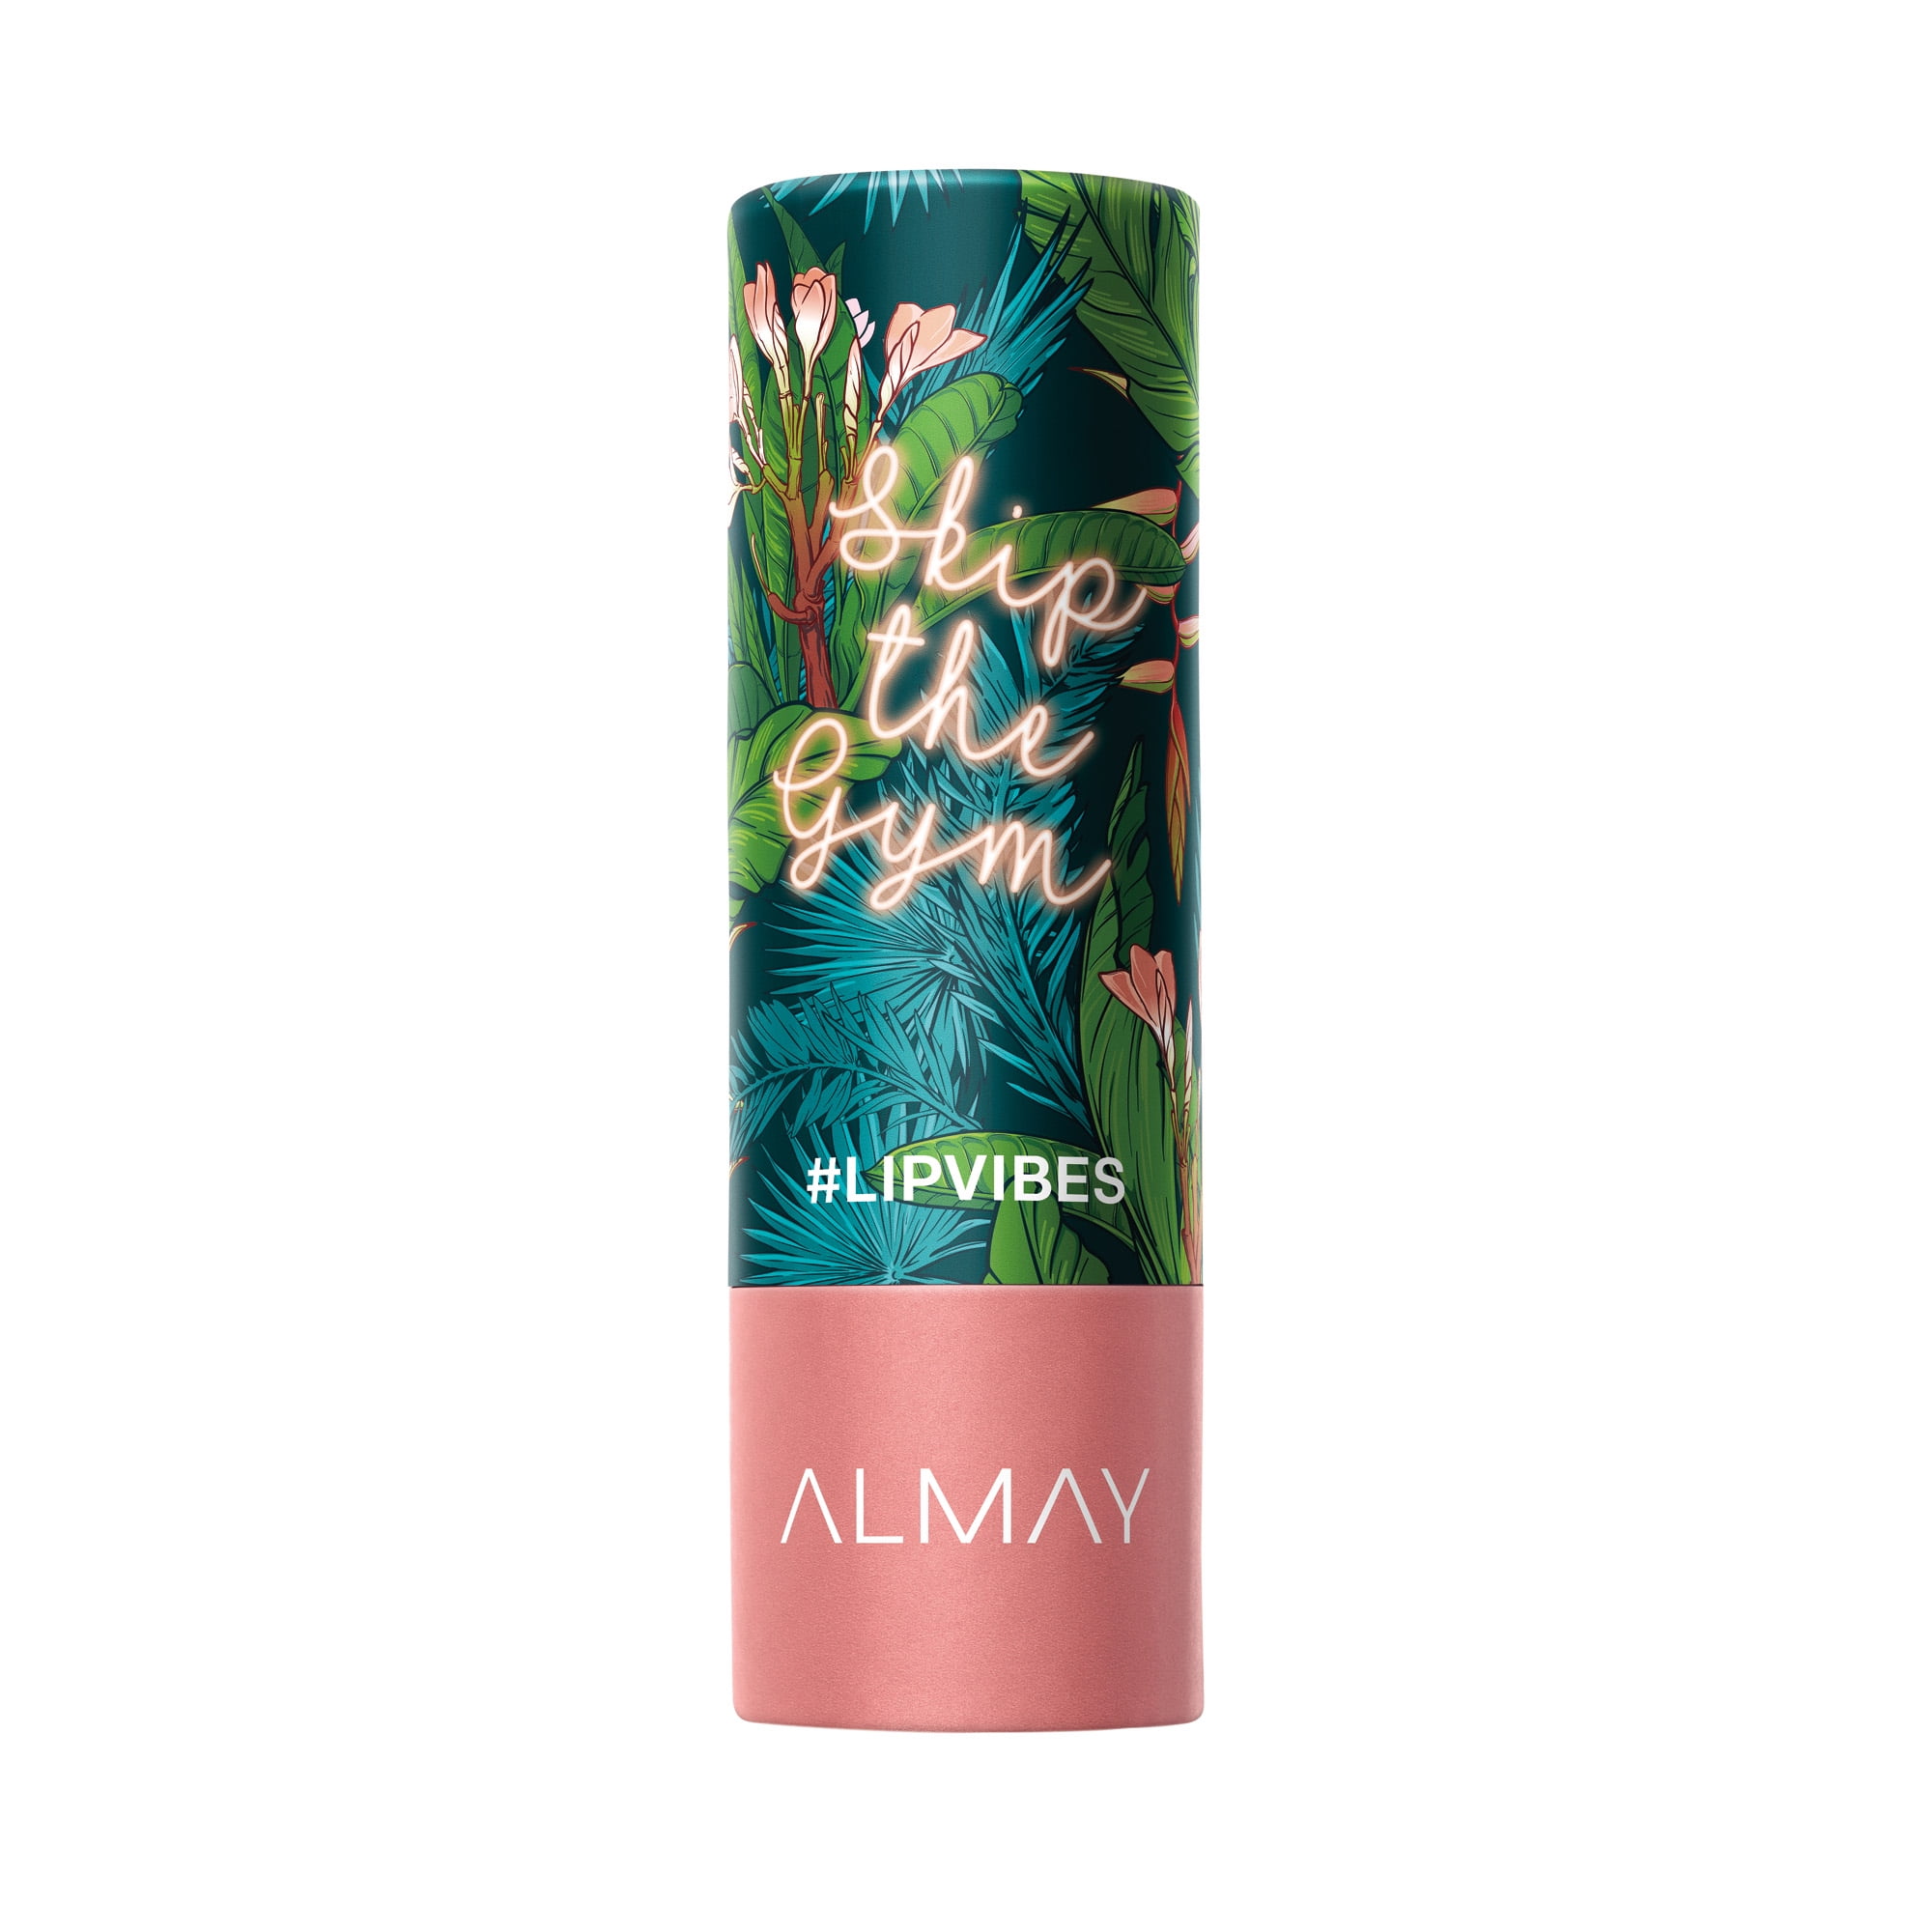 Almay Lip Vibes, Hypoallergenic, Cruelty Free, Oil Free, Fragrance Free, Ophthalmologist Tested Lipstick, with Shea Butter and Vitamins E and C, Skip The Gym